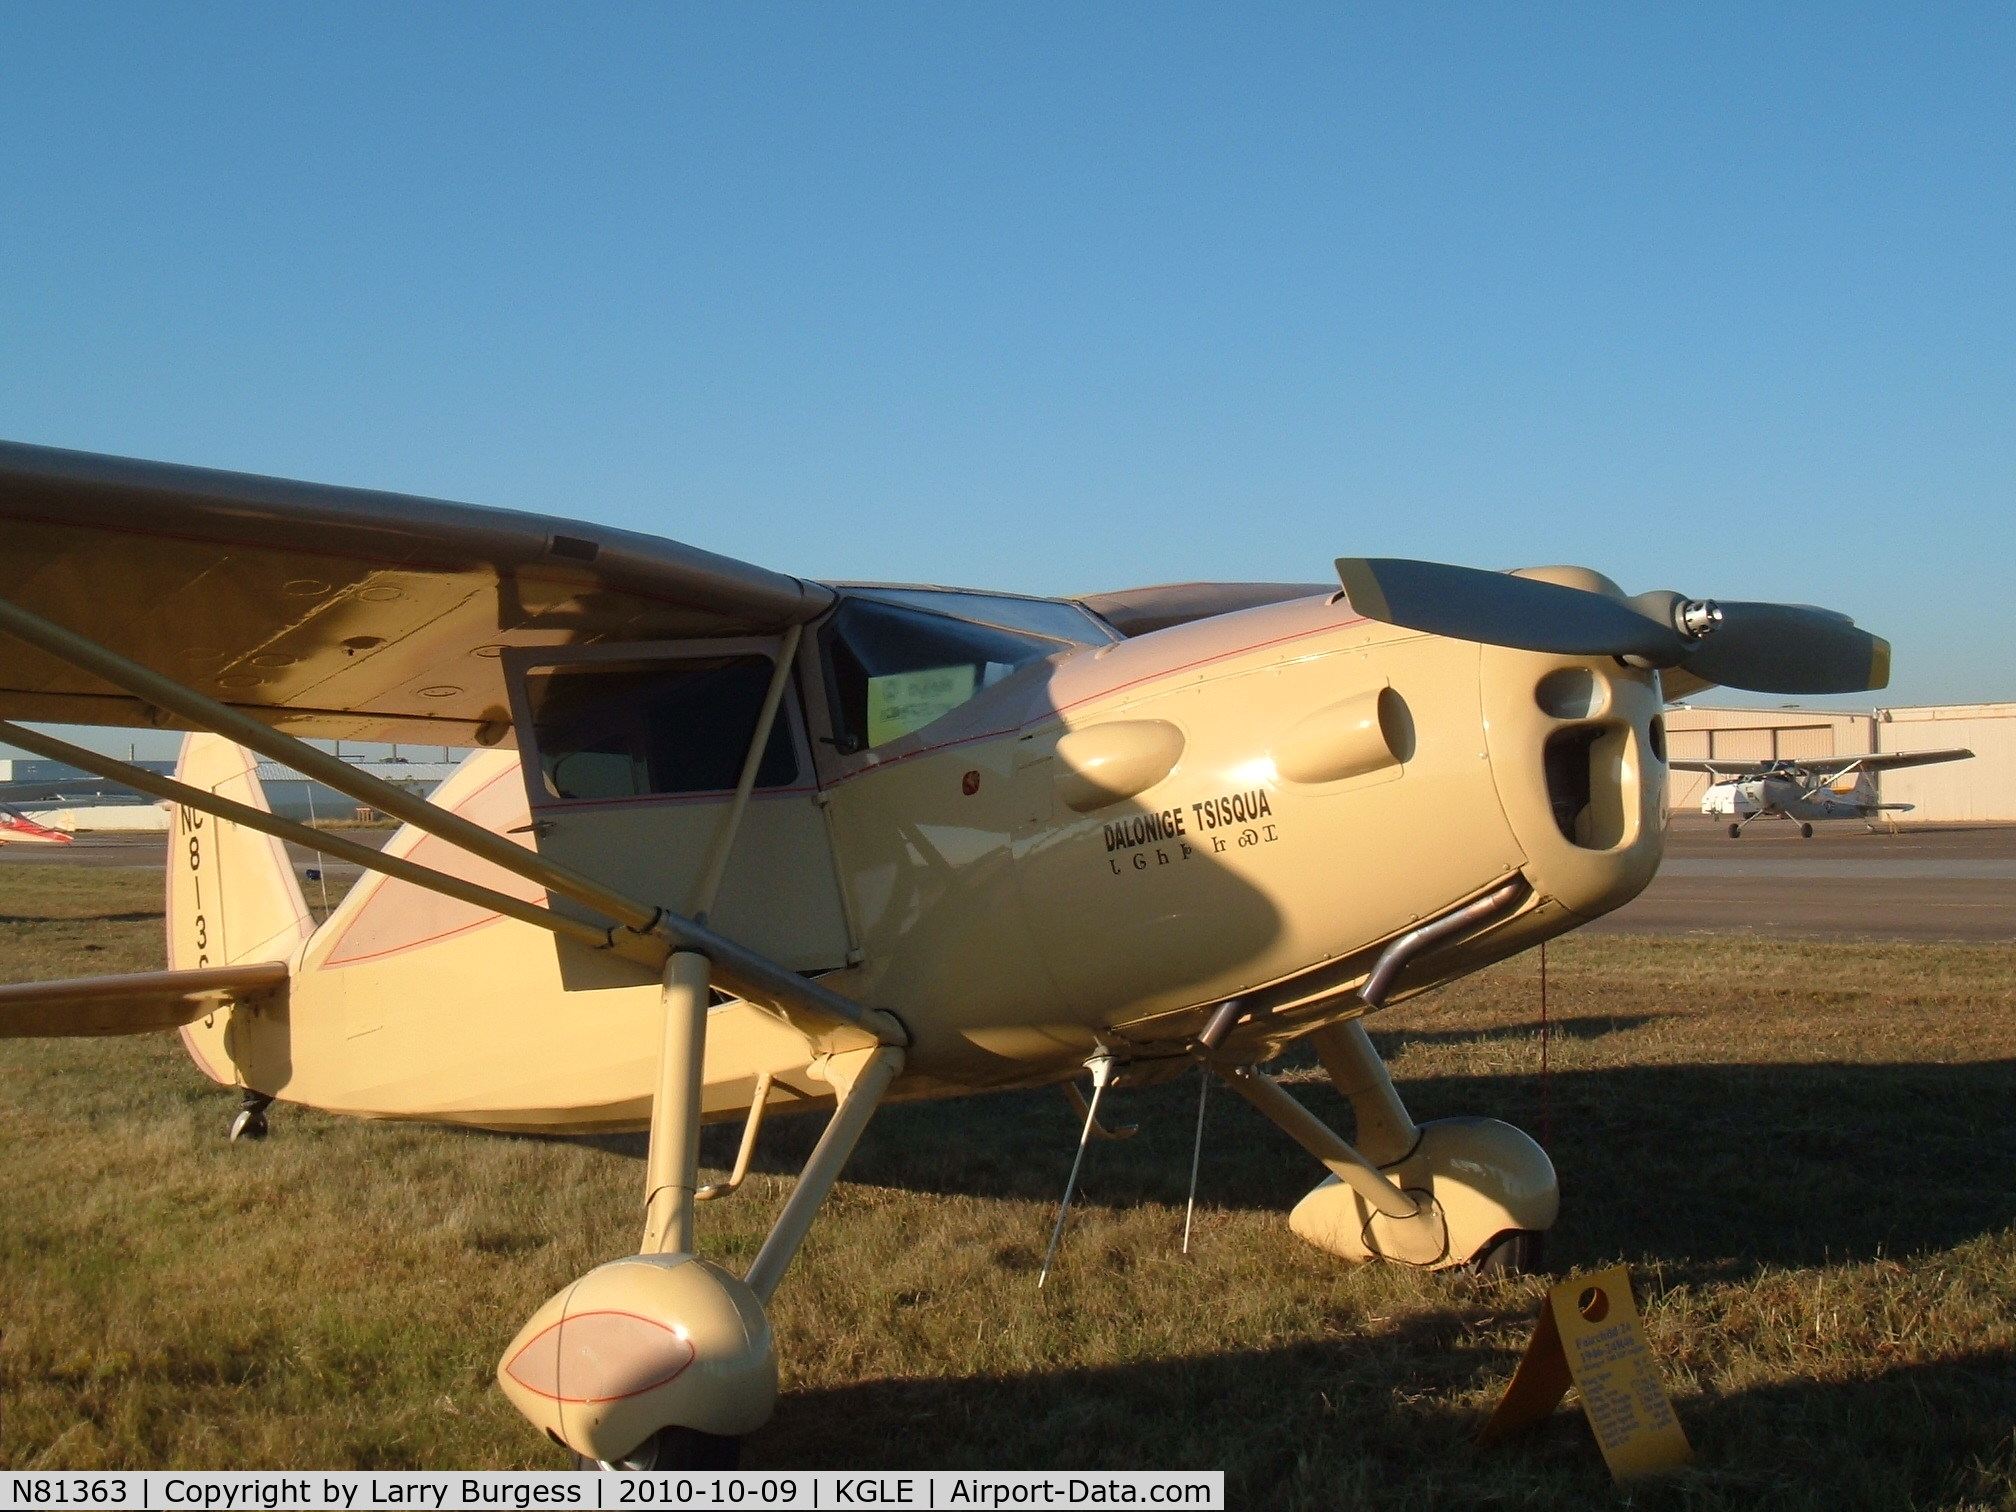 N81363, 1946 Fairchild 24R-46 C/N R46263, At the Fall Festival of Flight — the 48th Annual Fly-in at the Gainesville Municipal Airport hosted by the Texas Chapter of the Antique Airplane Association